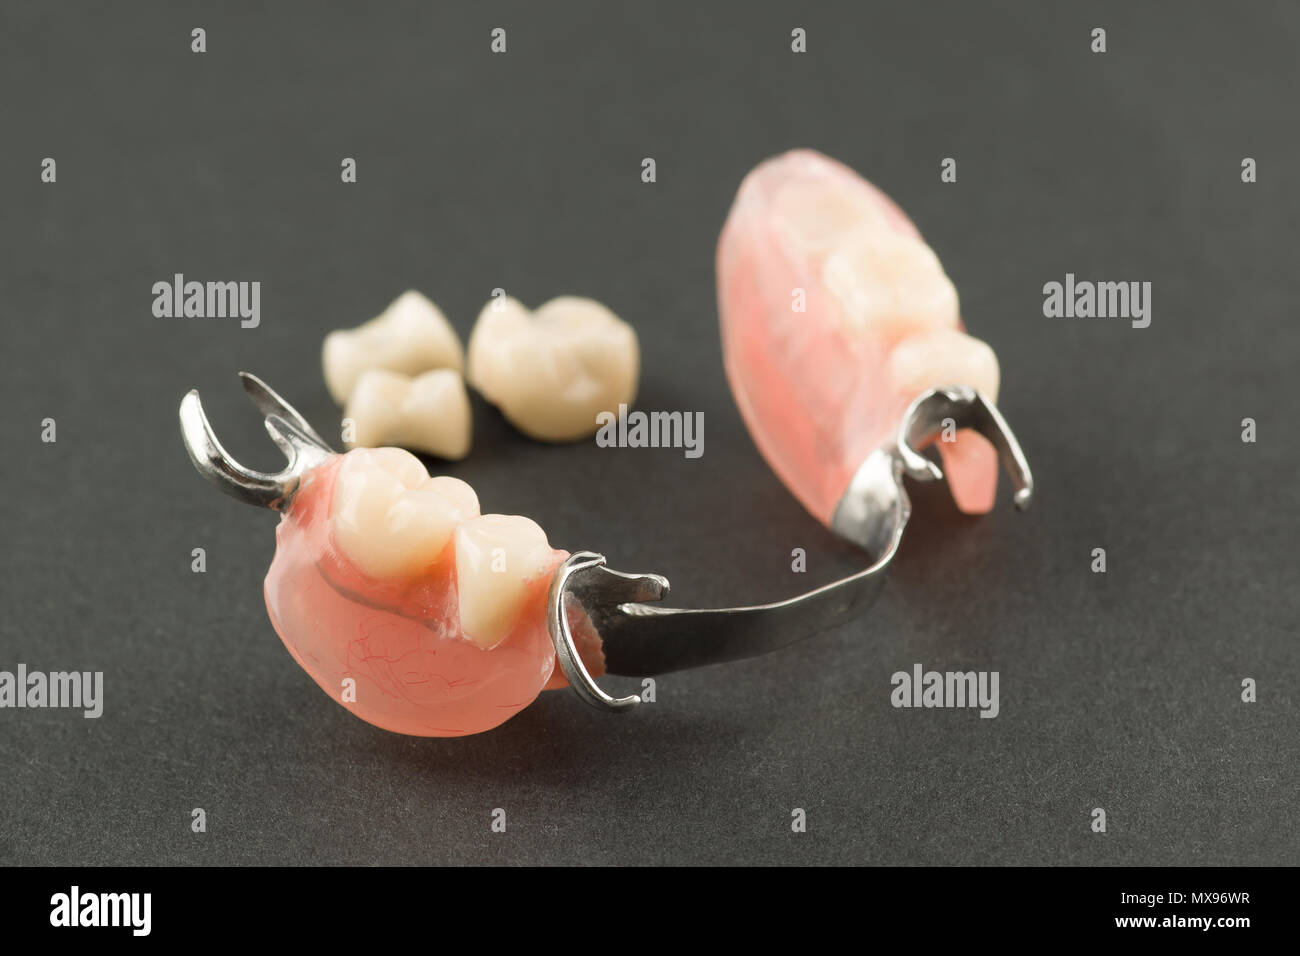 large image of a modern denture on a black background Stock Photo